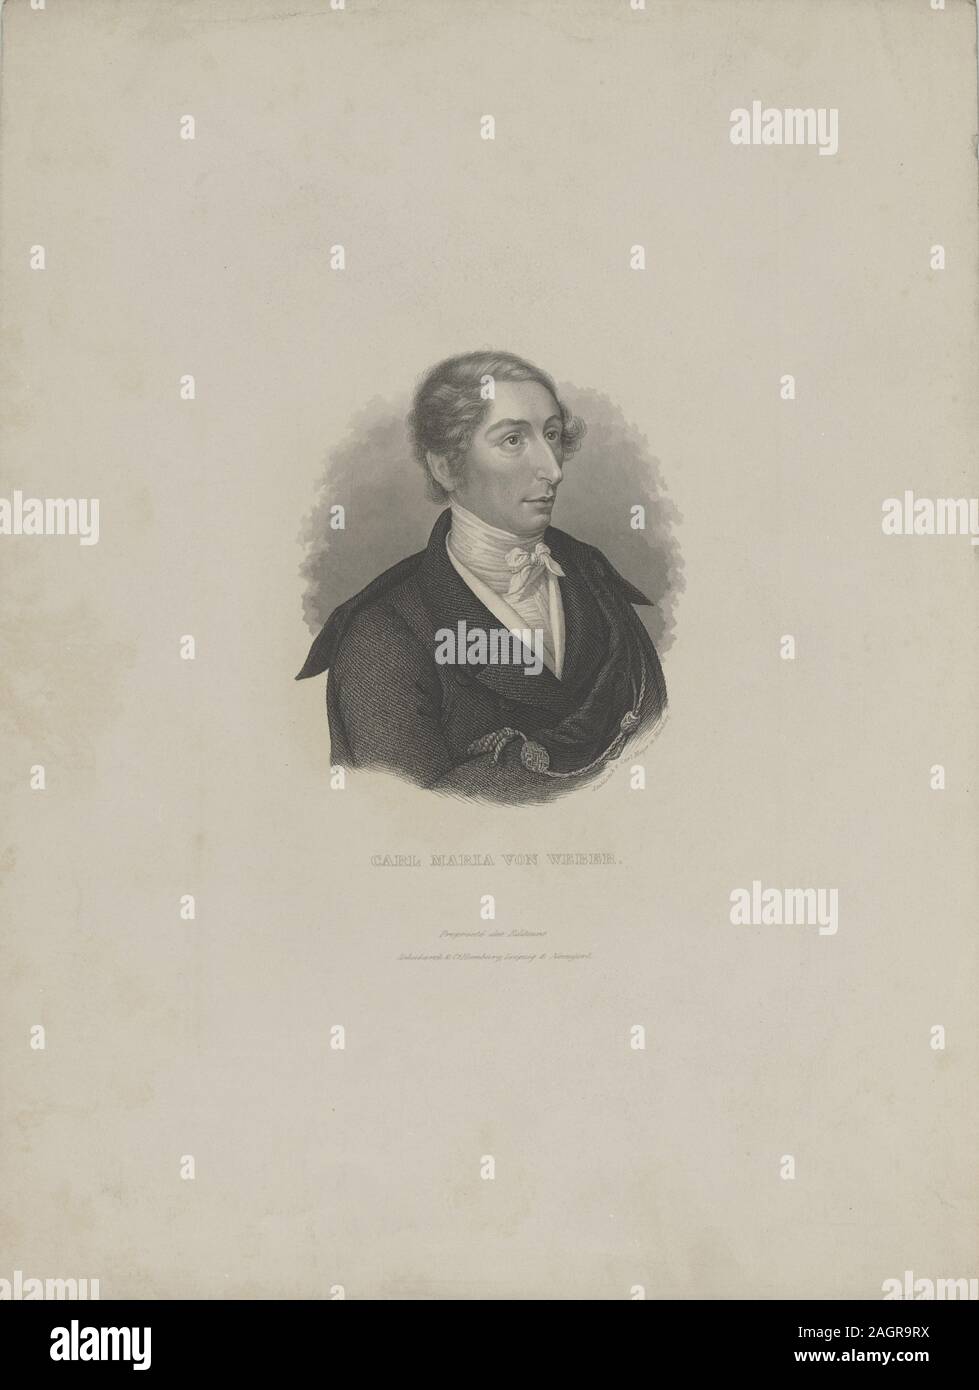 Carl Maria von Weber (1786-1826). Museum: PRIVATE COLLECTION. Author: CARL MAYER. Stock Photo